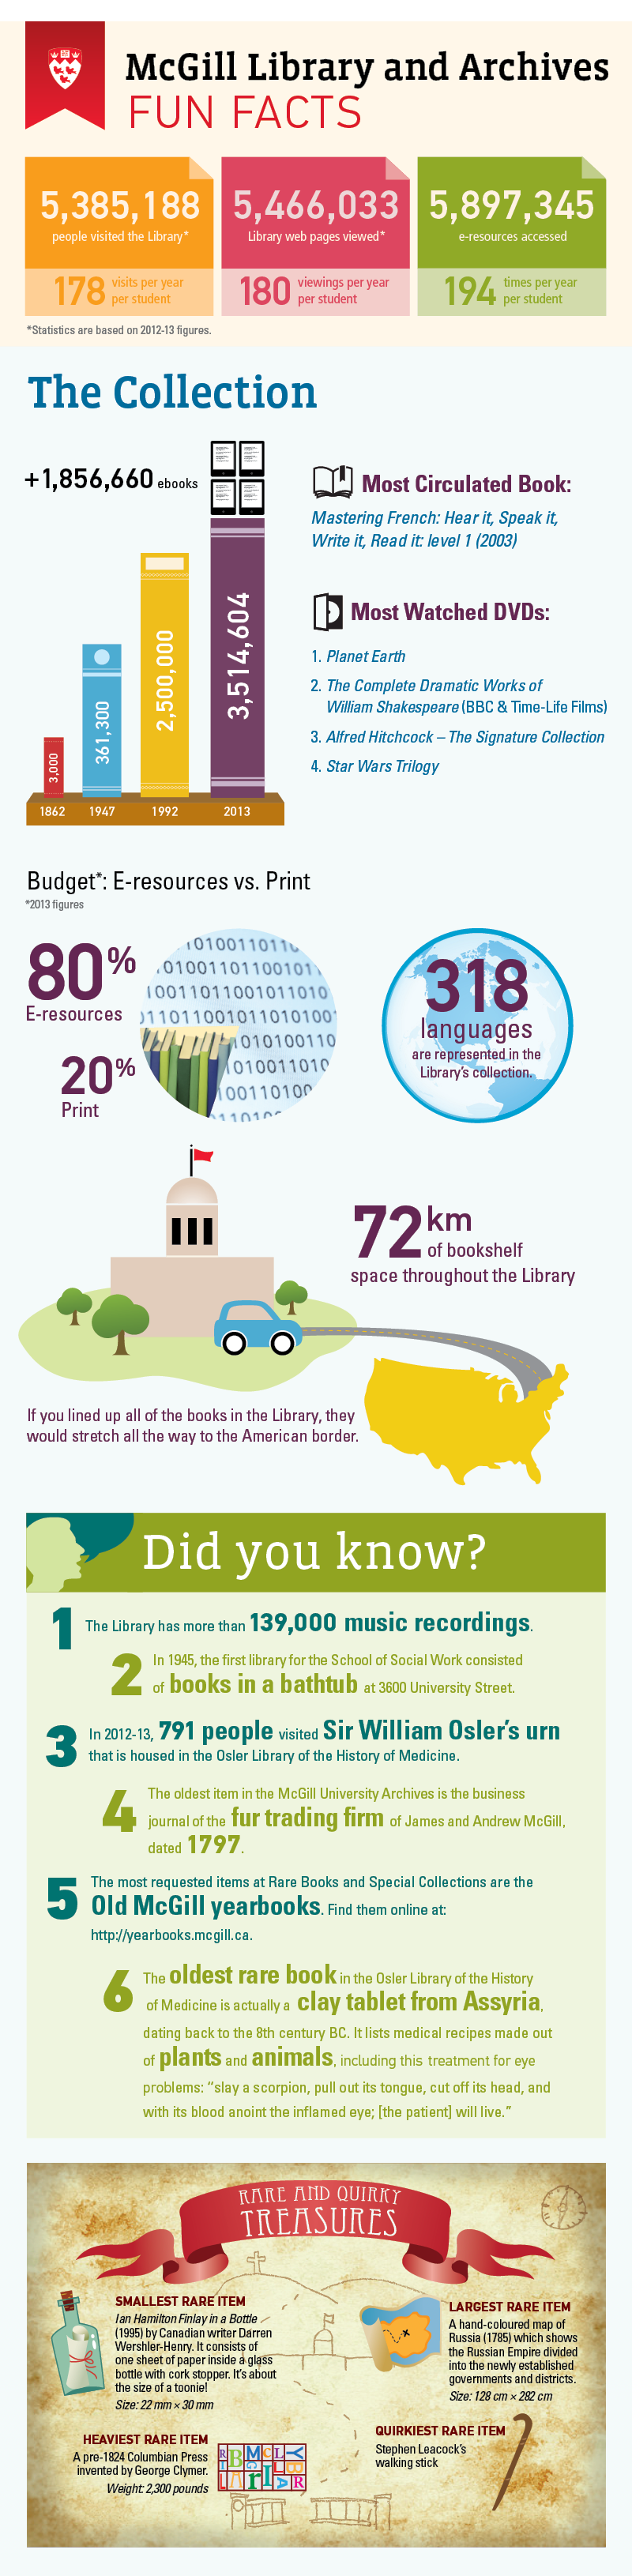 Infographic - McGill Library & Archives Fun Facts 